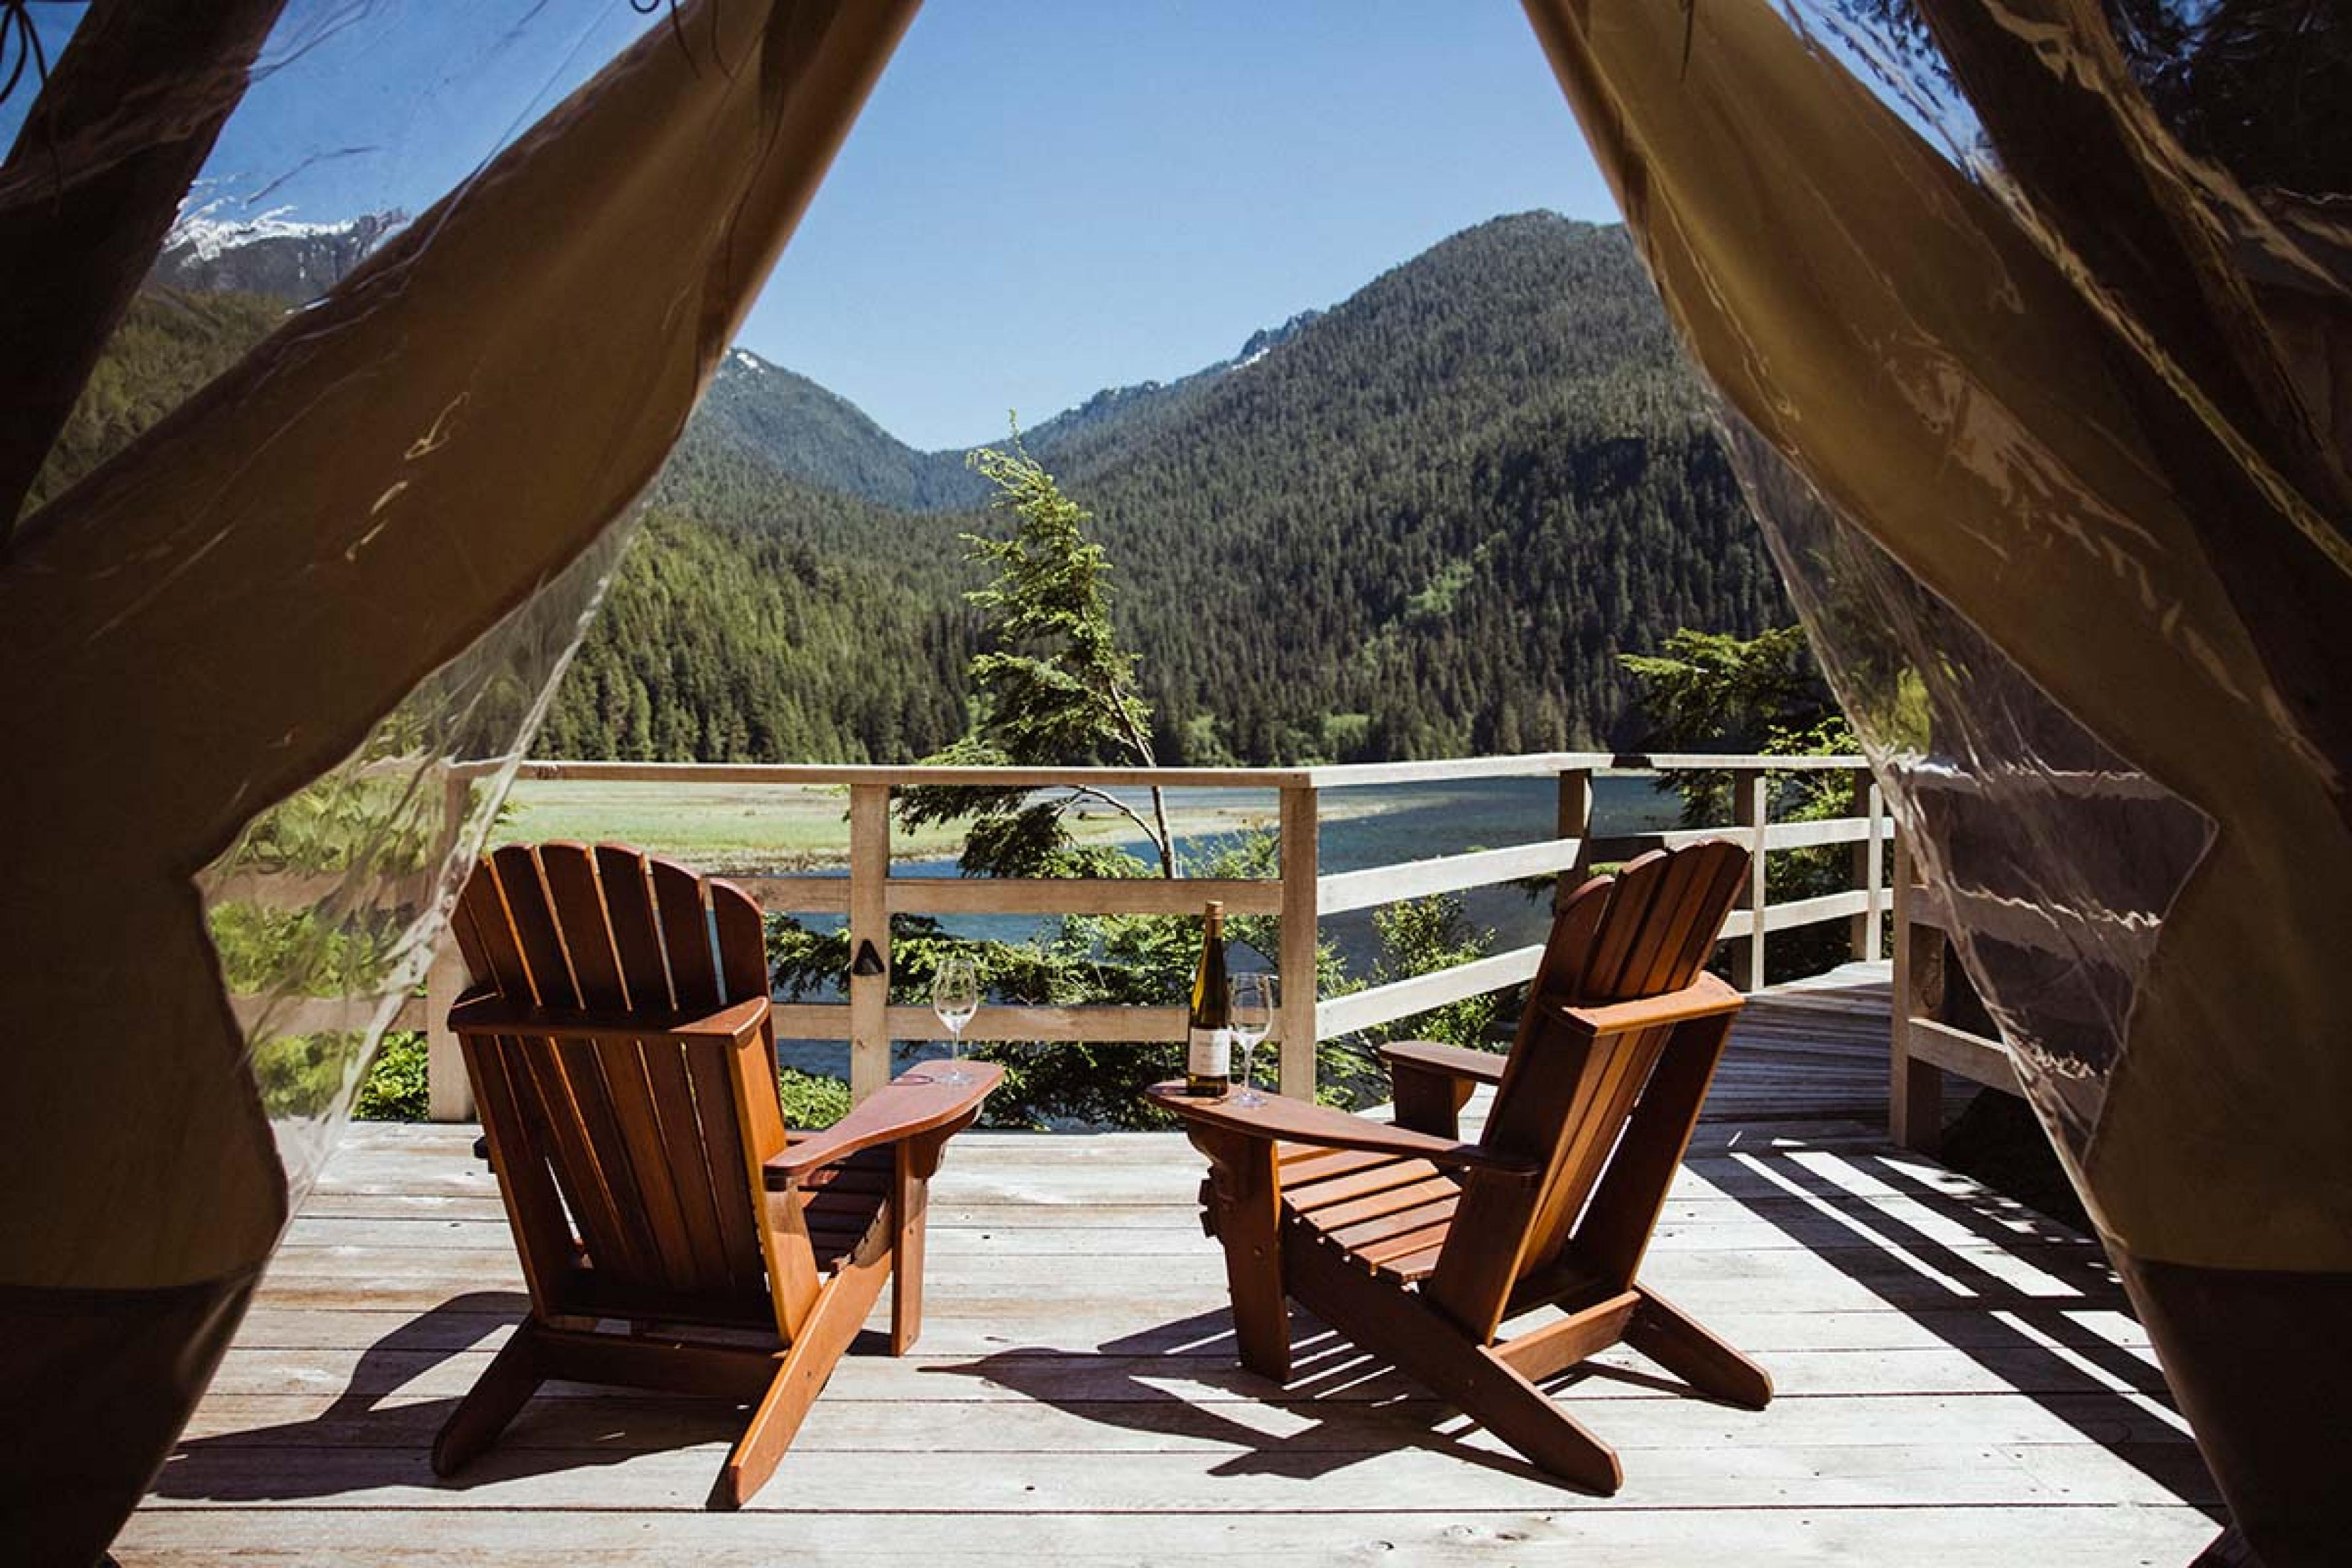 to Adirondack chairs on a wooden deck outside a tent looking out on a lake and mountains